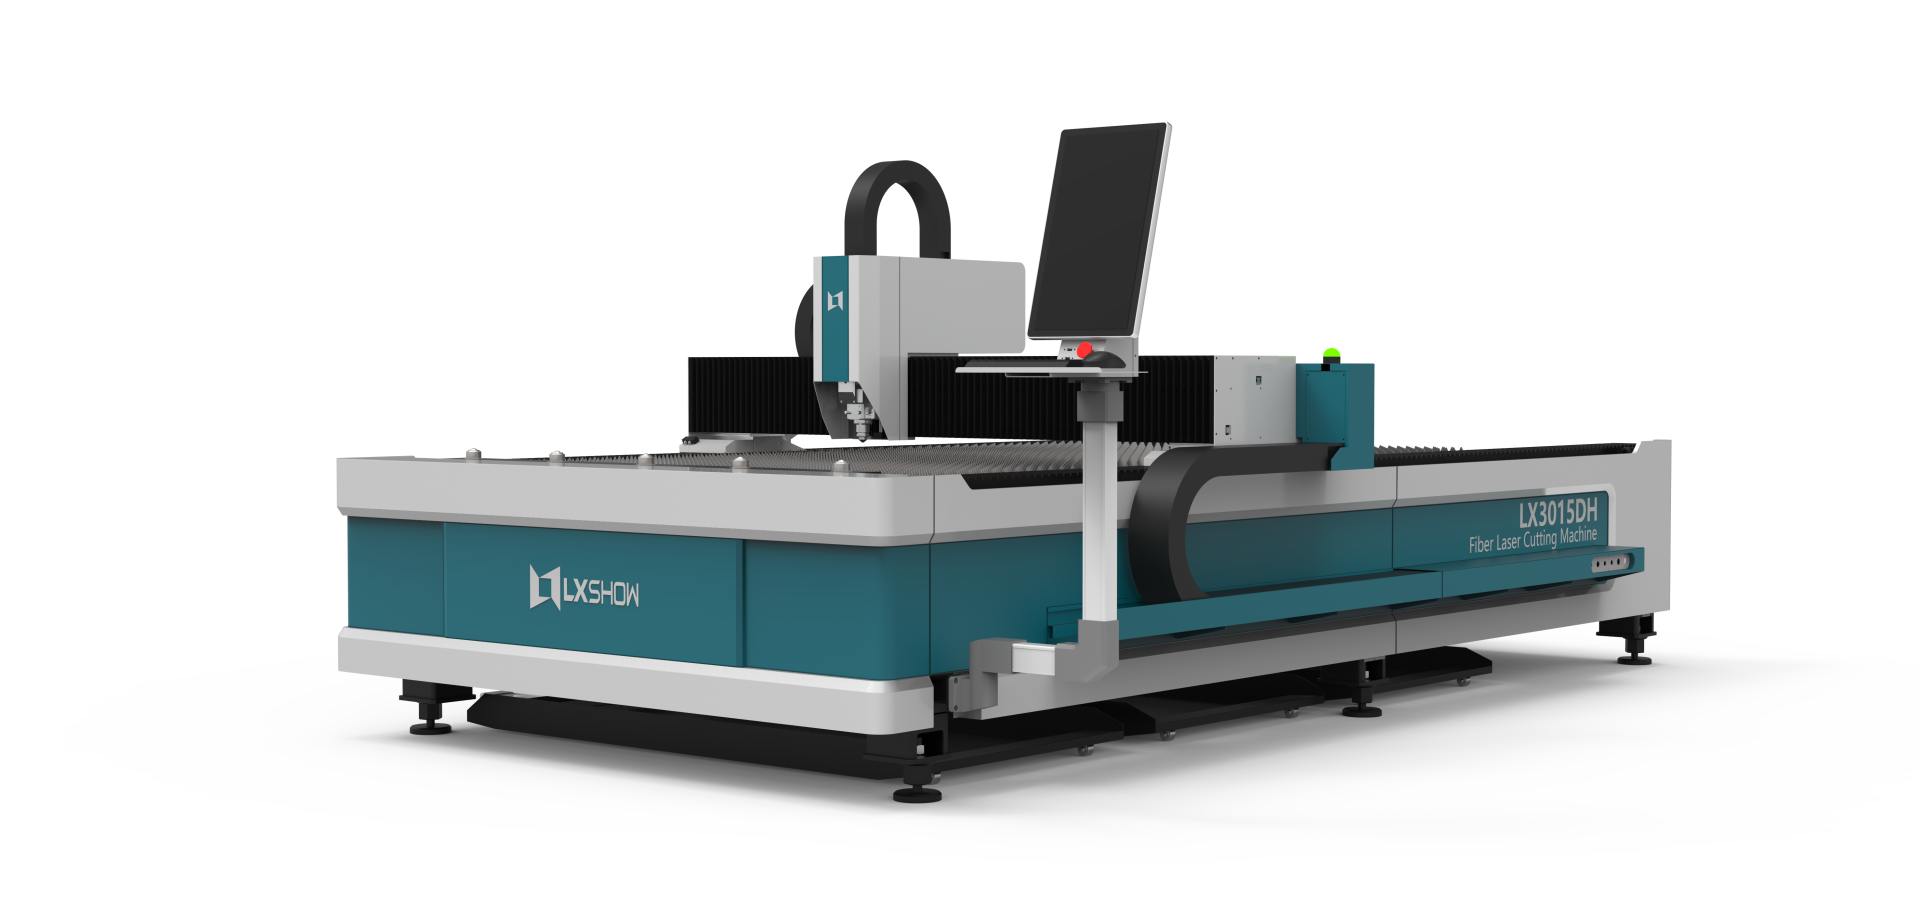 LXSHOW Made its Debut at METALLOOBRABOTKA 2023 Exhibition with its Metal Laser Cutter Machines